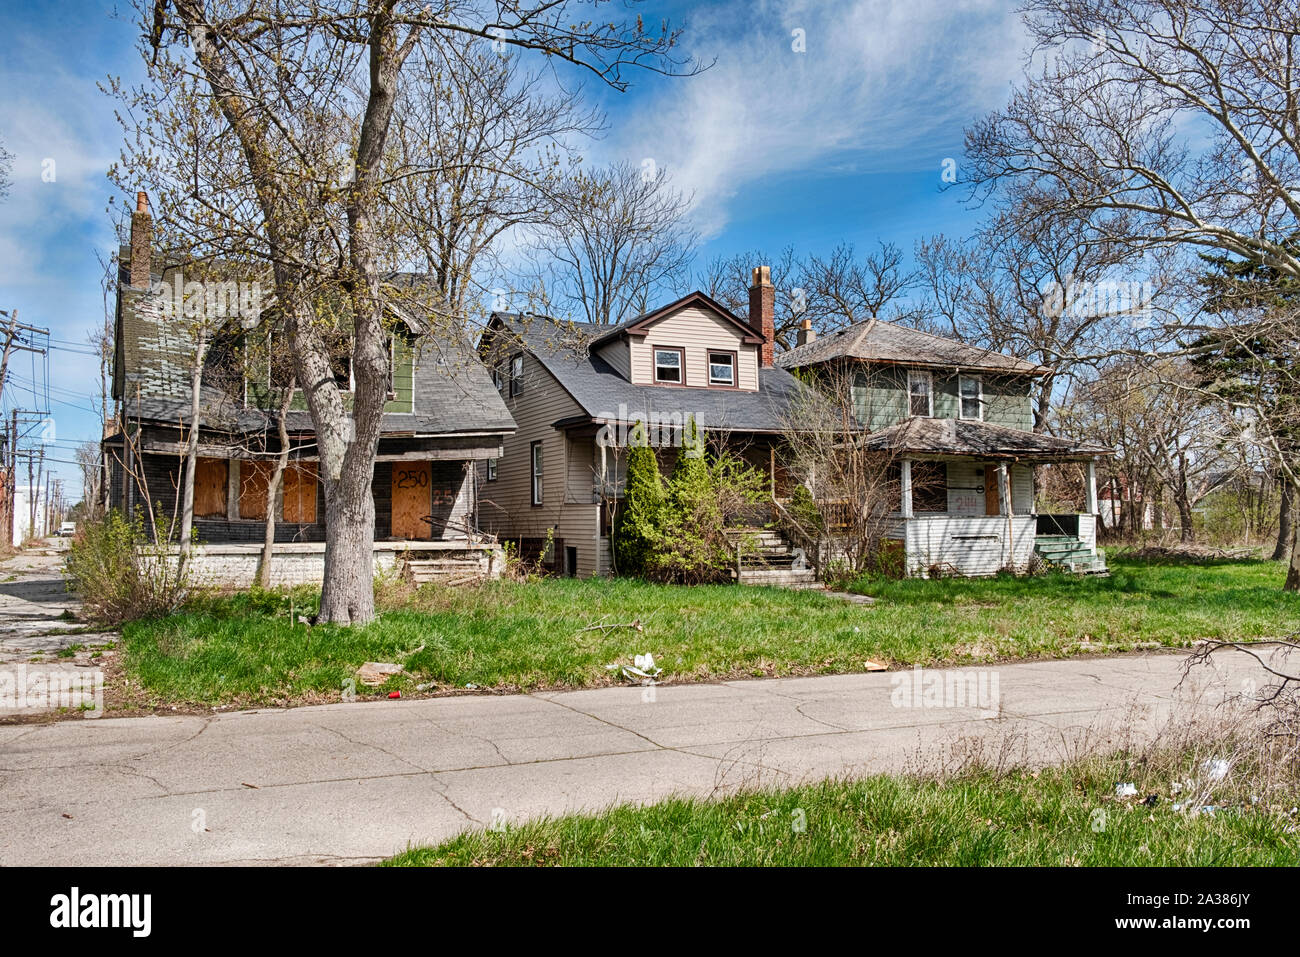 DETROIT, MICHIGAN - APRIL 27, 2019:  Three old houses have been abandoned and are gradually falling apart in a Detoit neighborhood. Stock Photo